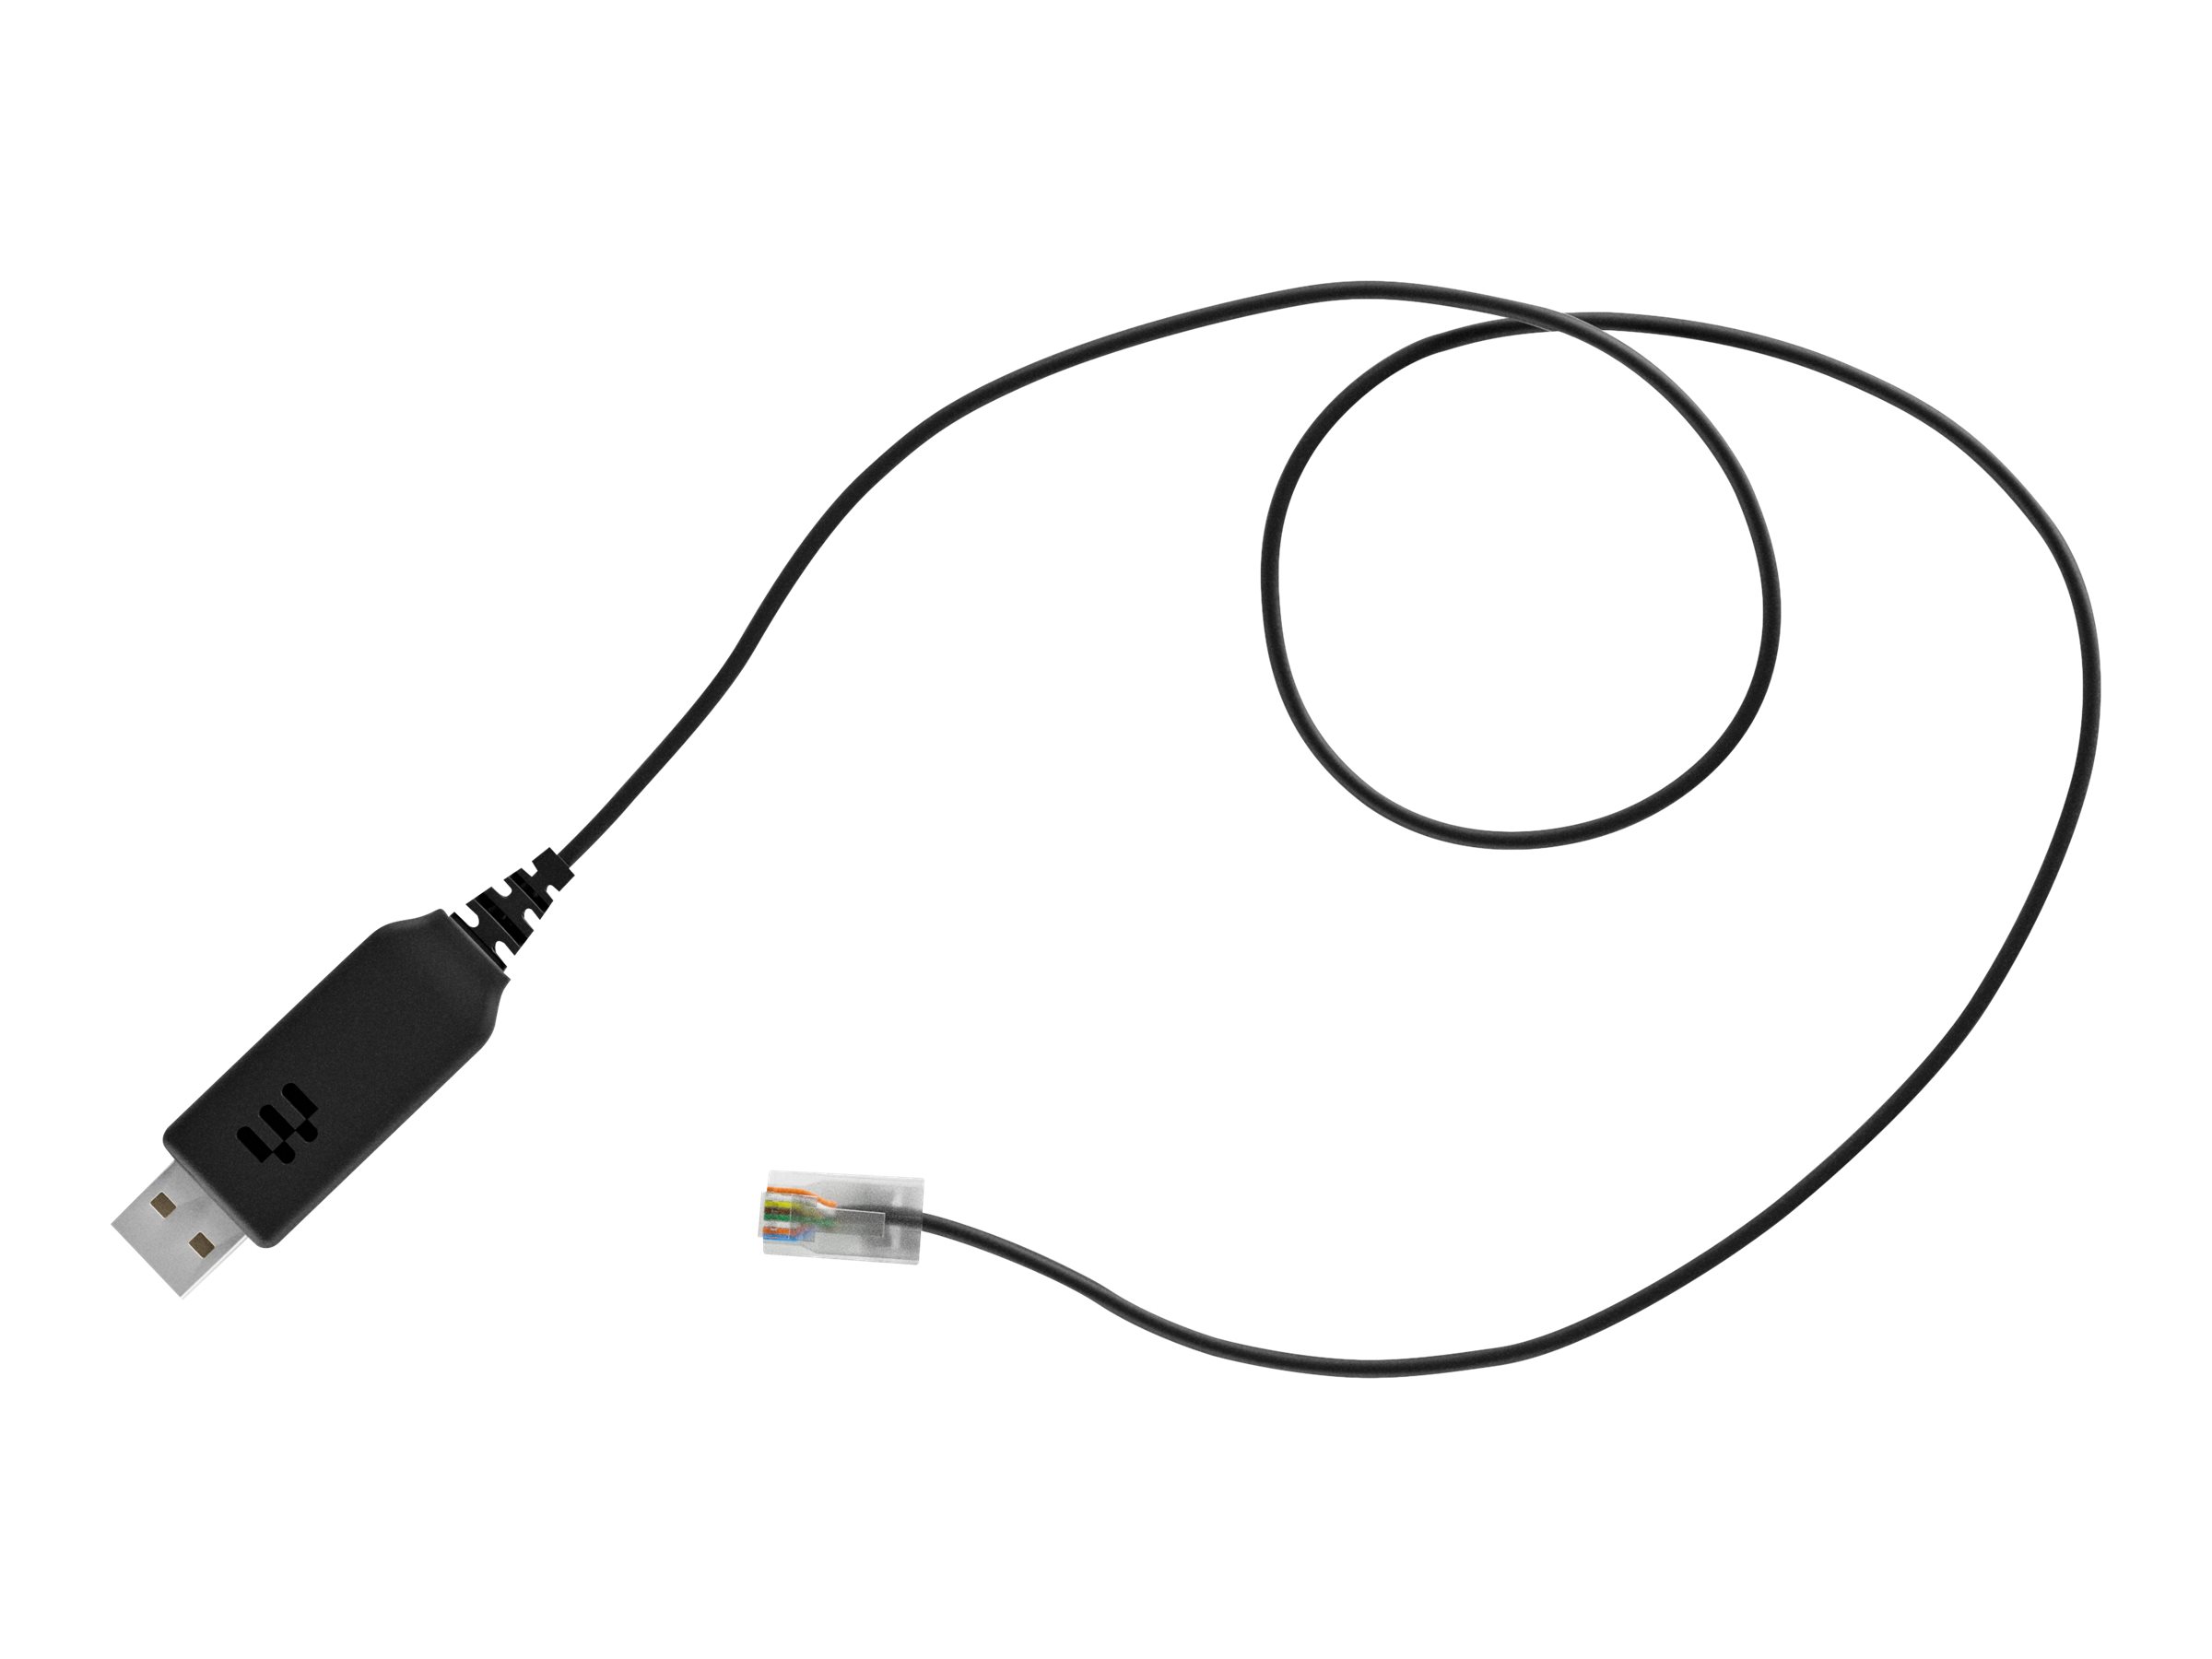 EPOS CEHS-CI 02 - Electronic hook switch adapter for headset, VoIP phone www.shi.com